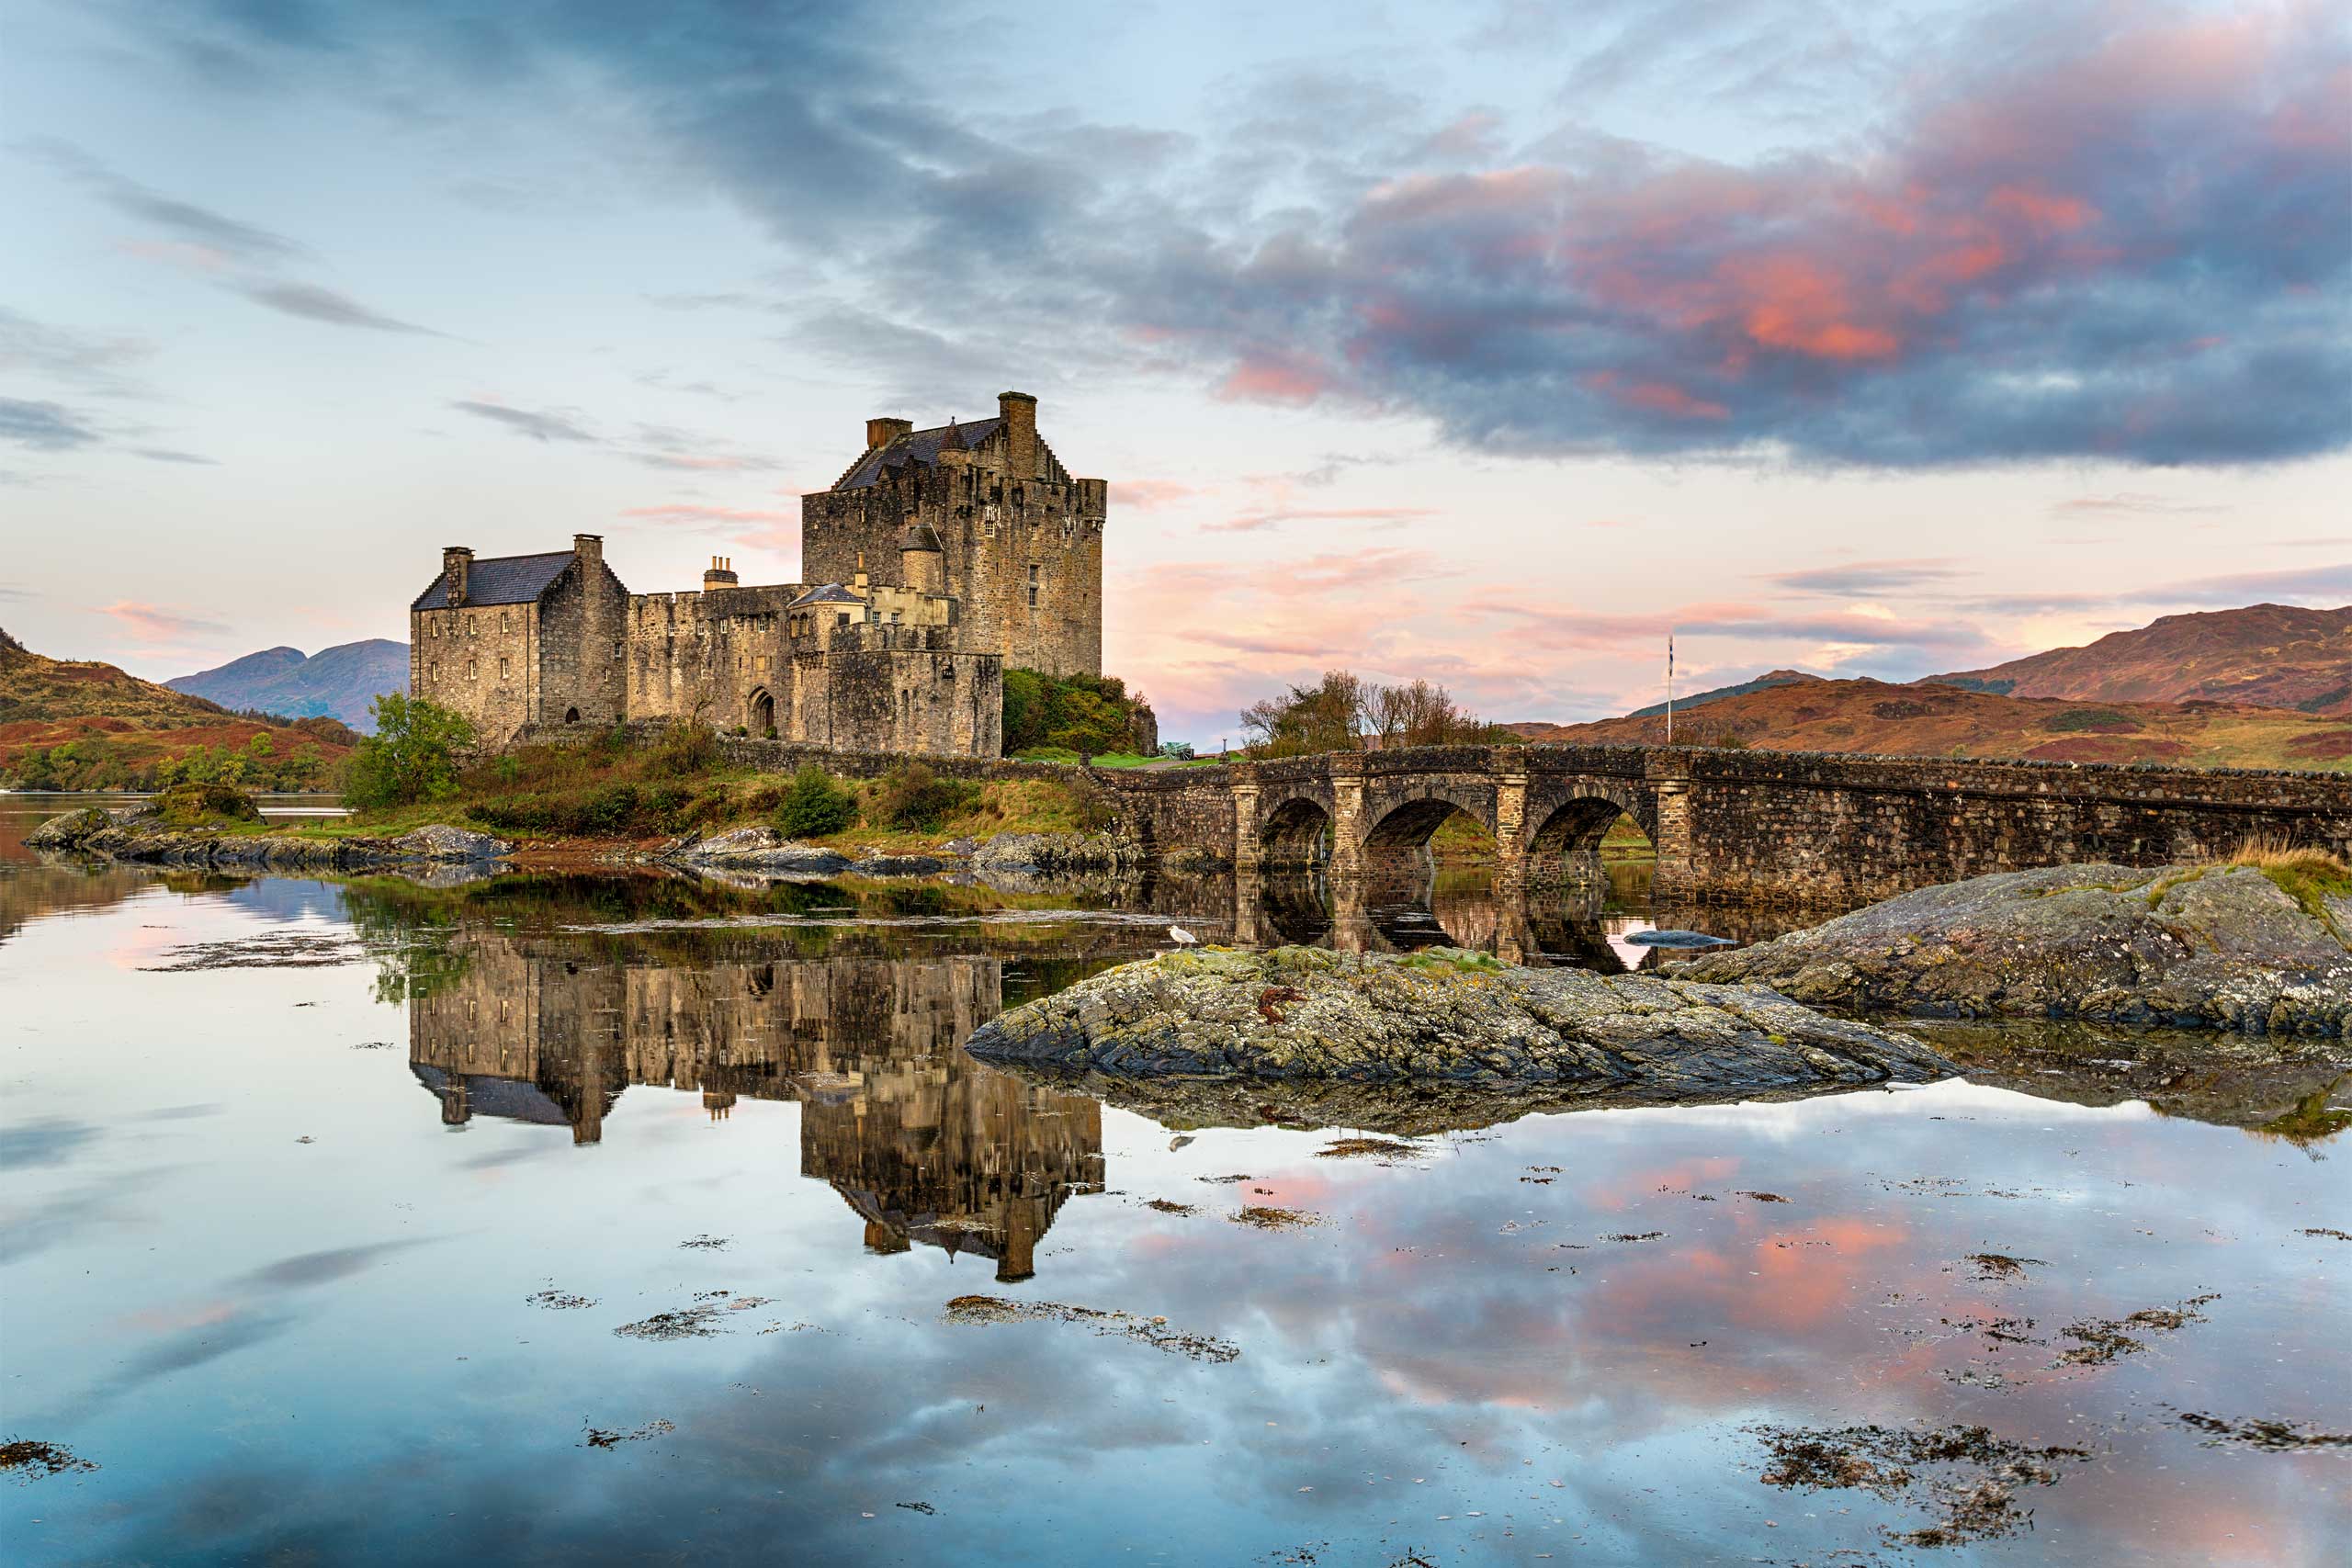 An image of Eilean Donan Castle in Scotland to illustrate the booking process of a vacation with turas travel